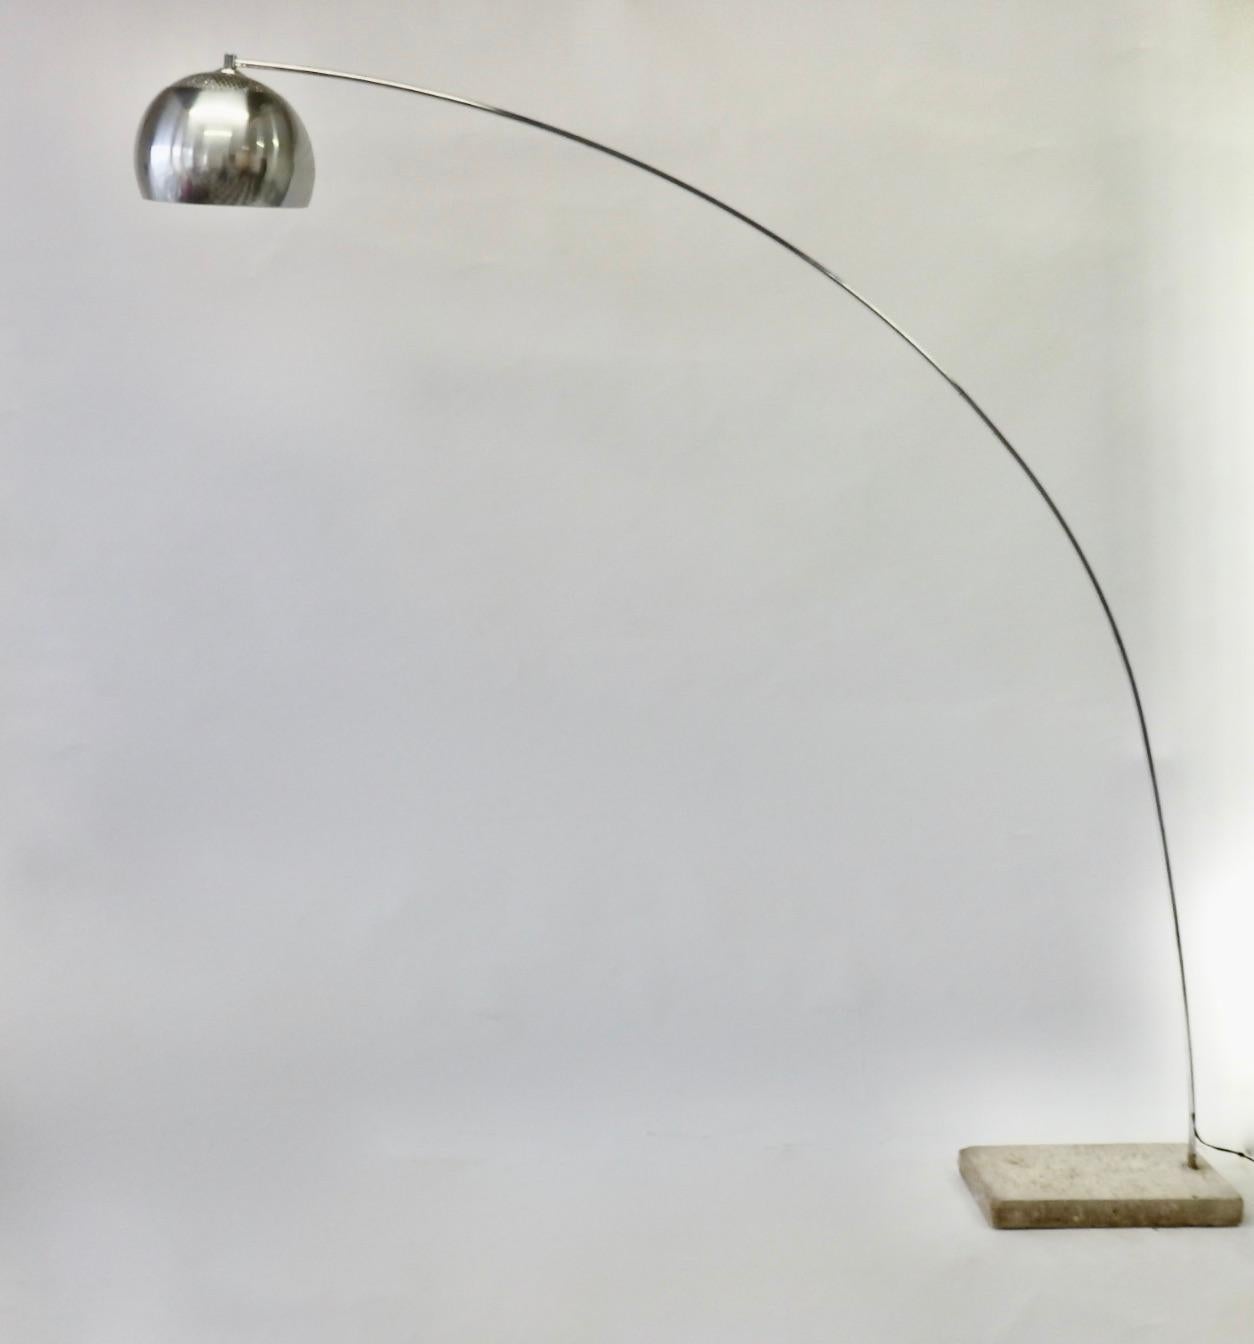 Attributed to Achille and Pierre Castiglioni Arco lamp. Arcing chrome shaft hold aluminum ball globe anchored in steel covered cast cement. Shown here with cement and covered base. Base measures 19 deep - 11.5 wide - 2.5 tall. Lamp is 82 high at